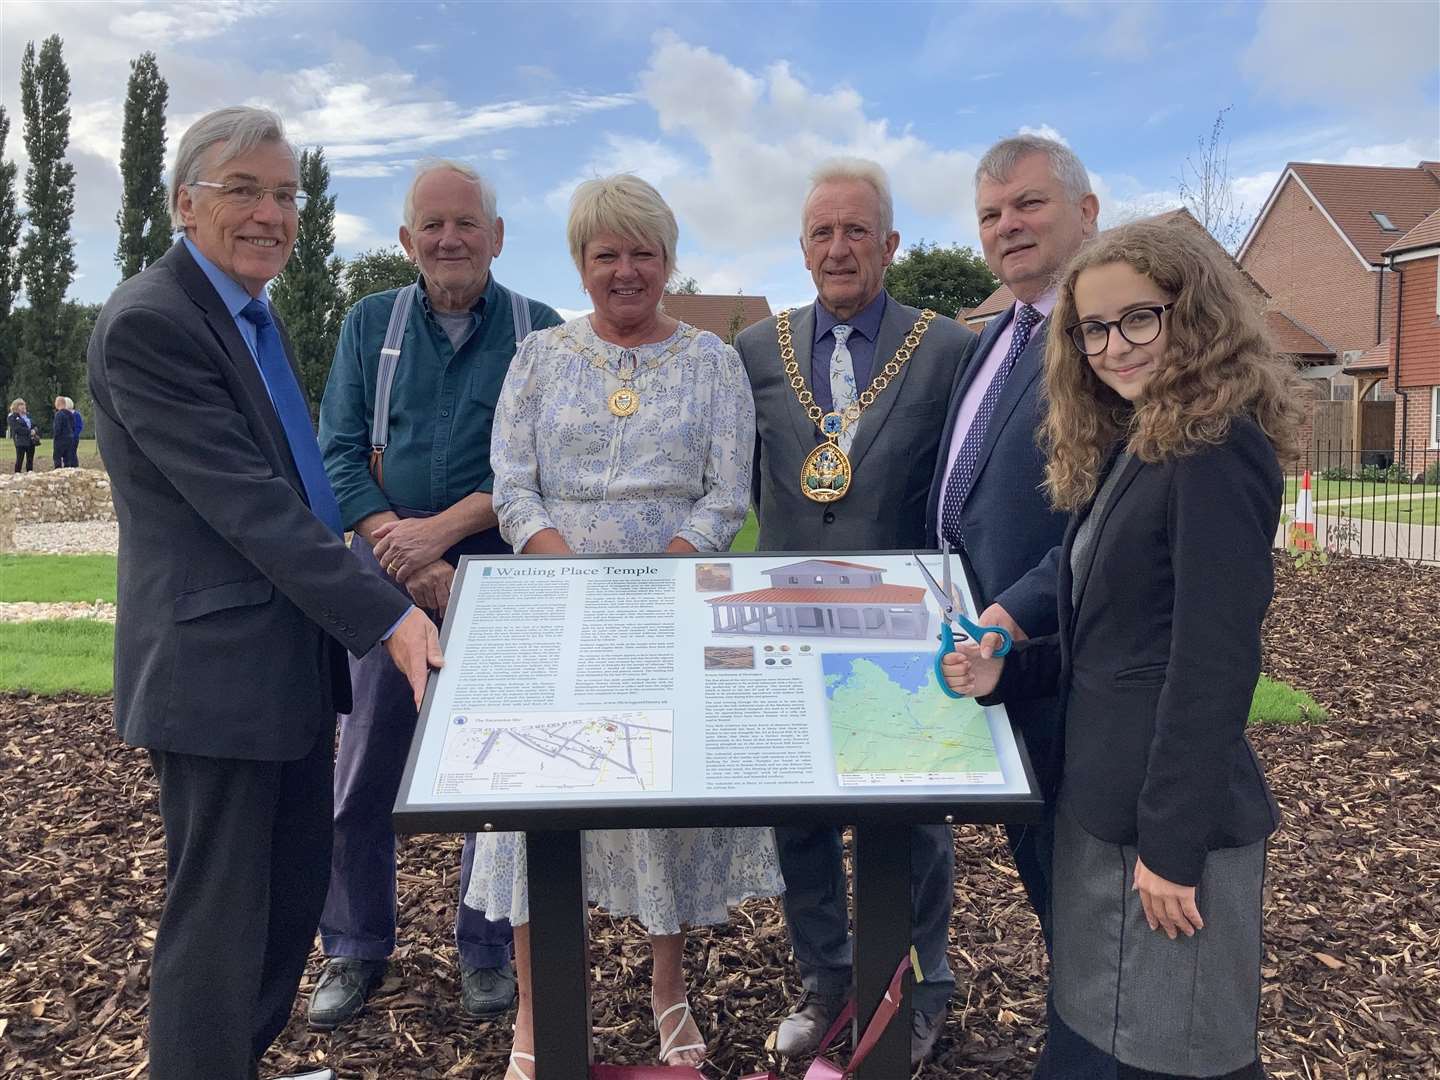 Pupil Ellie Wolfe, 12, right, cut the ribbon to unveil the recreation of the 2,000-year-old Romano-British temple discovered near her home at Newington, Sittingbourne, with, from the left, Richard Thompstone, Paul Wilkinson, the mayor and mayoress of Swale Cllrs Paul and Sarah Stephen and Martin Crick of Persimmon Homes